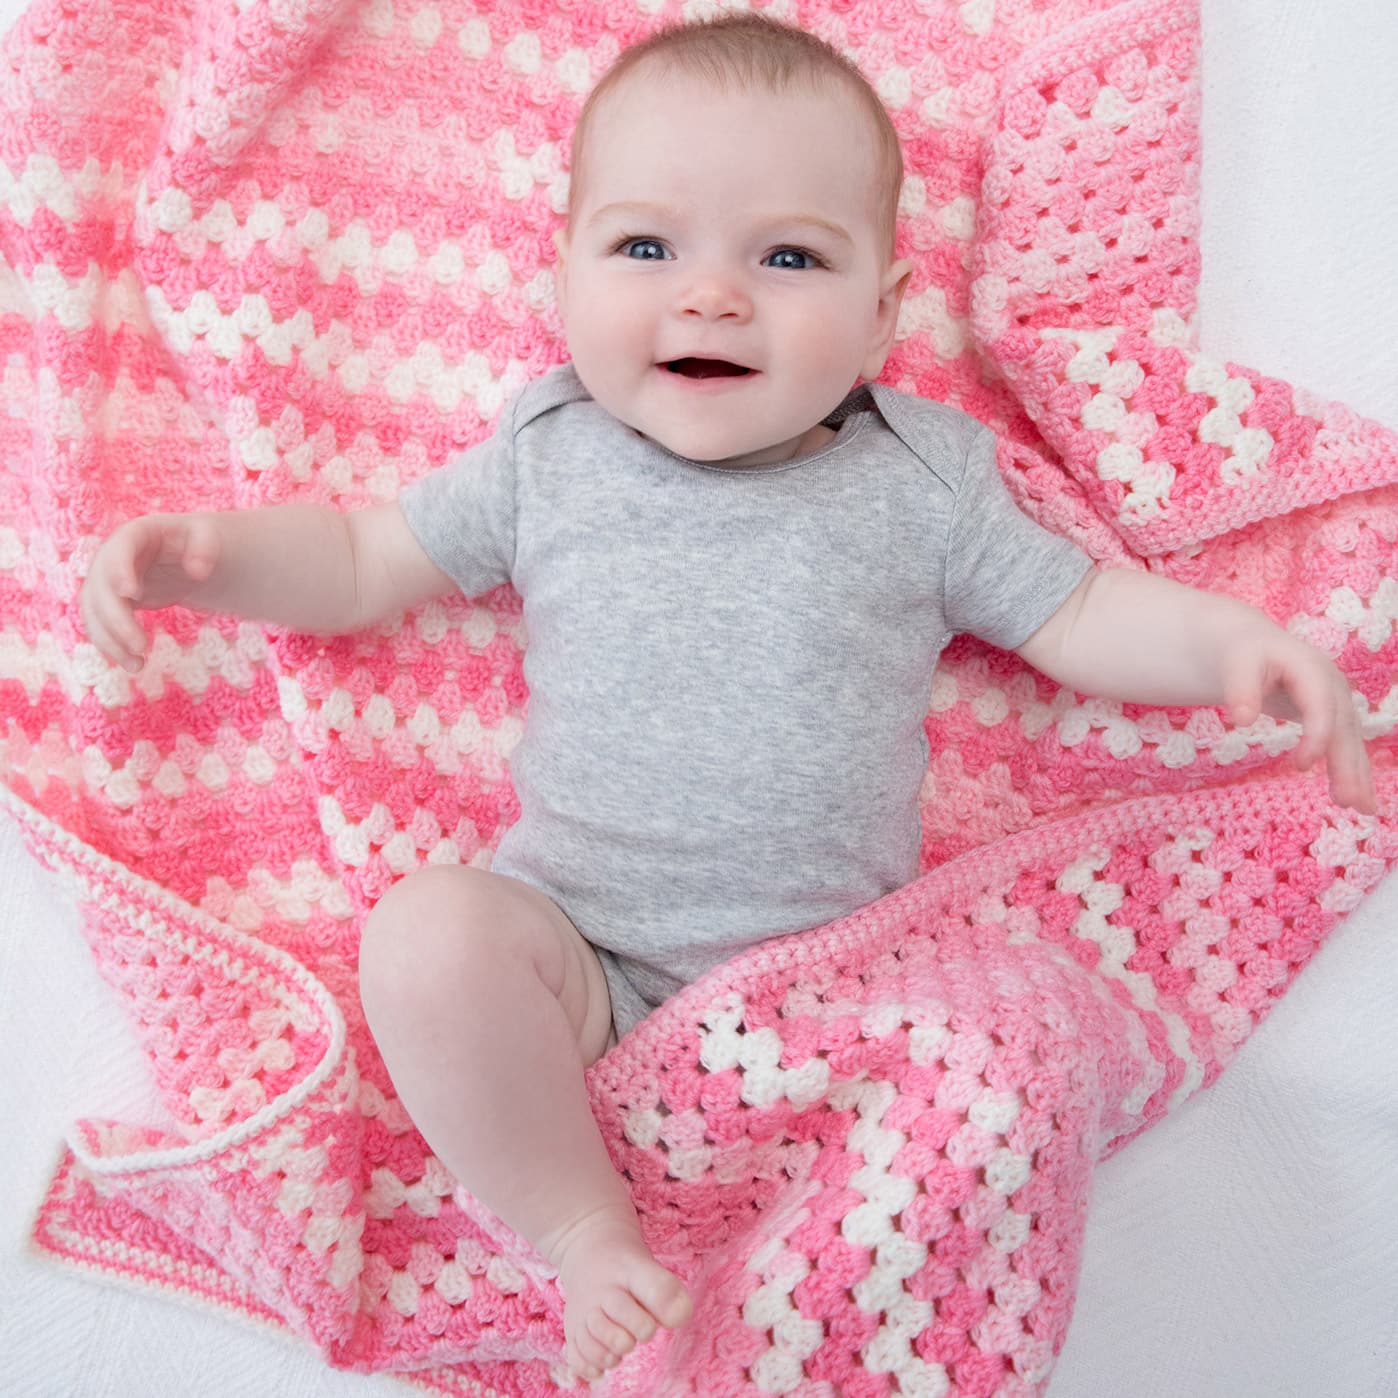 Lion Brand® Ice Cream® Big Scoop® Sweet Baby Crochet Afghan | Projects ...